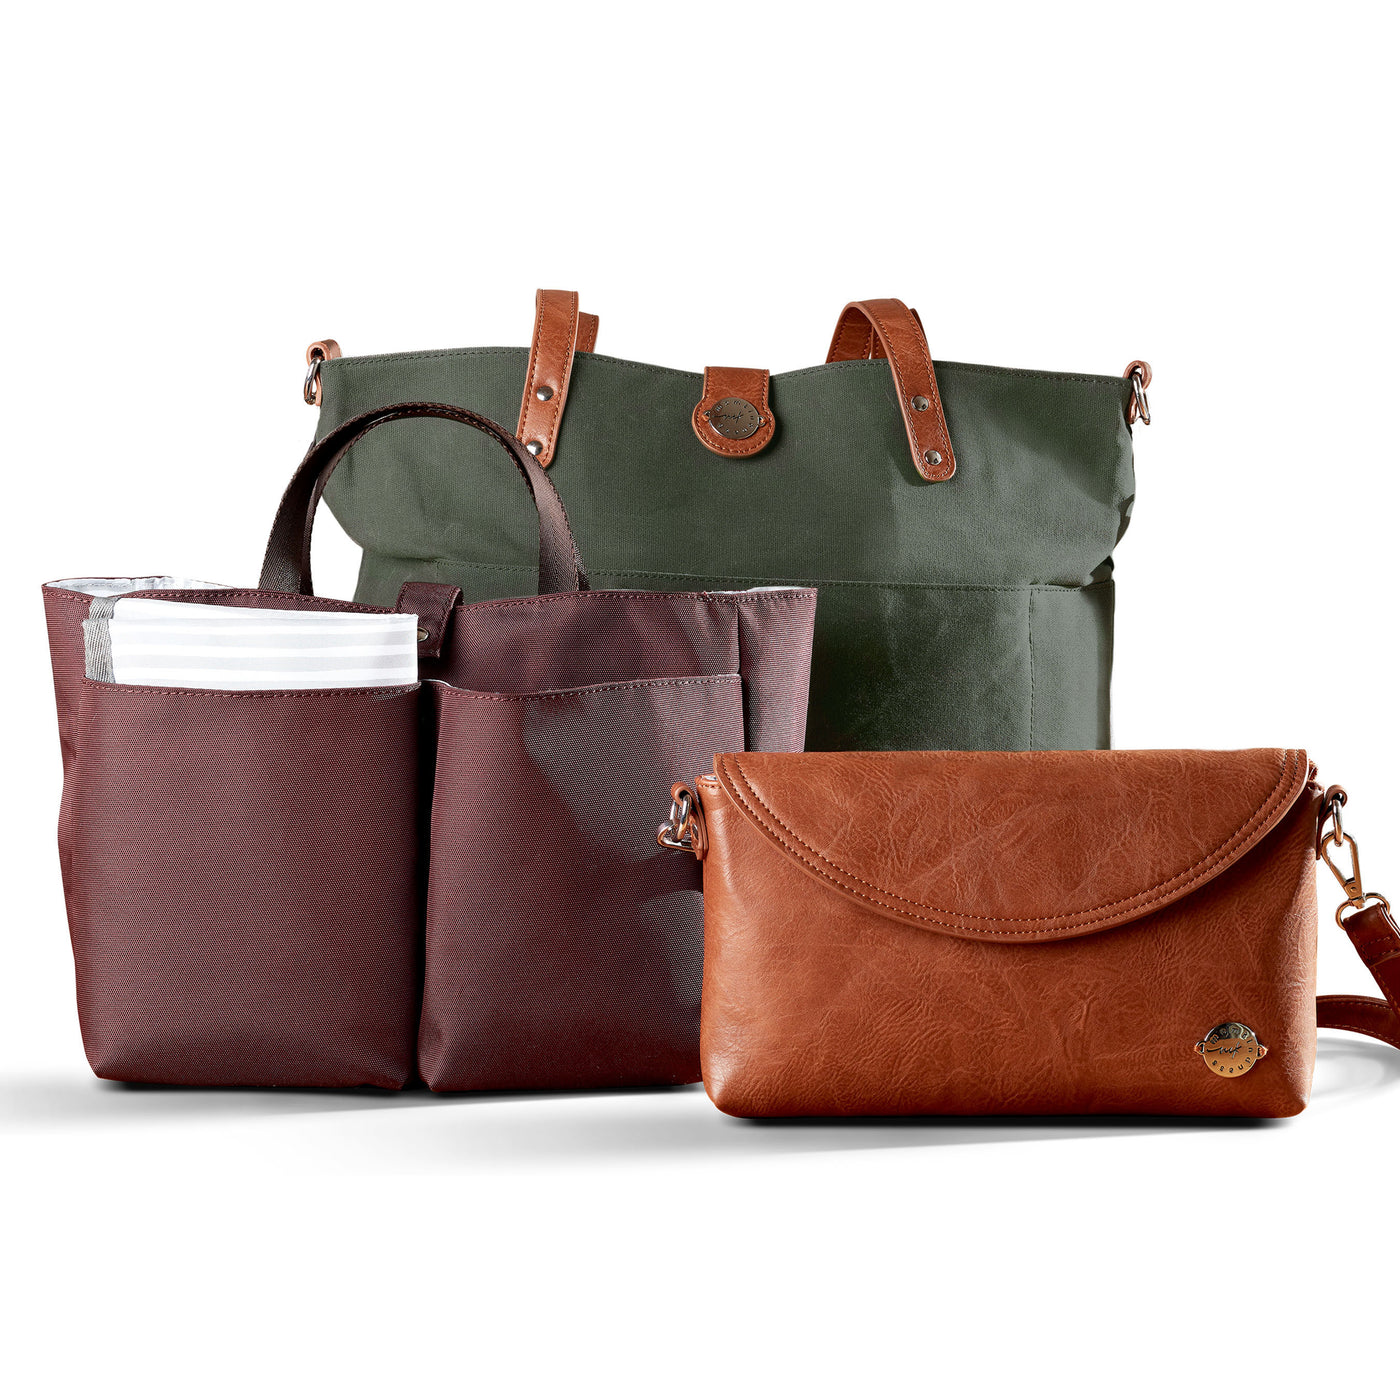 Forest Carry All Tote Trio shown with three included components; forest green waxed canvas tote with brown vegan leather accents, brown vegan leather diaper clutch and burgundy multi-pocket organizer insert with carry handles.